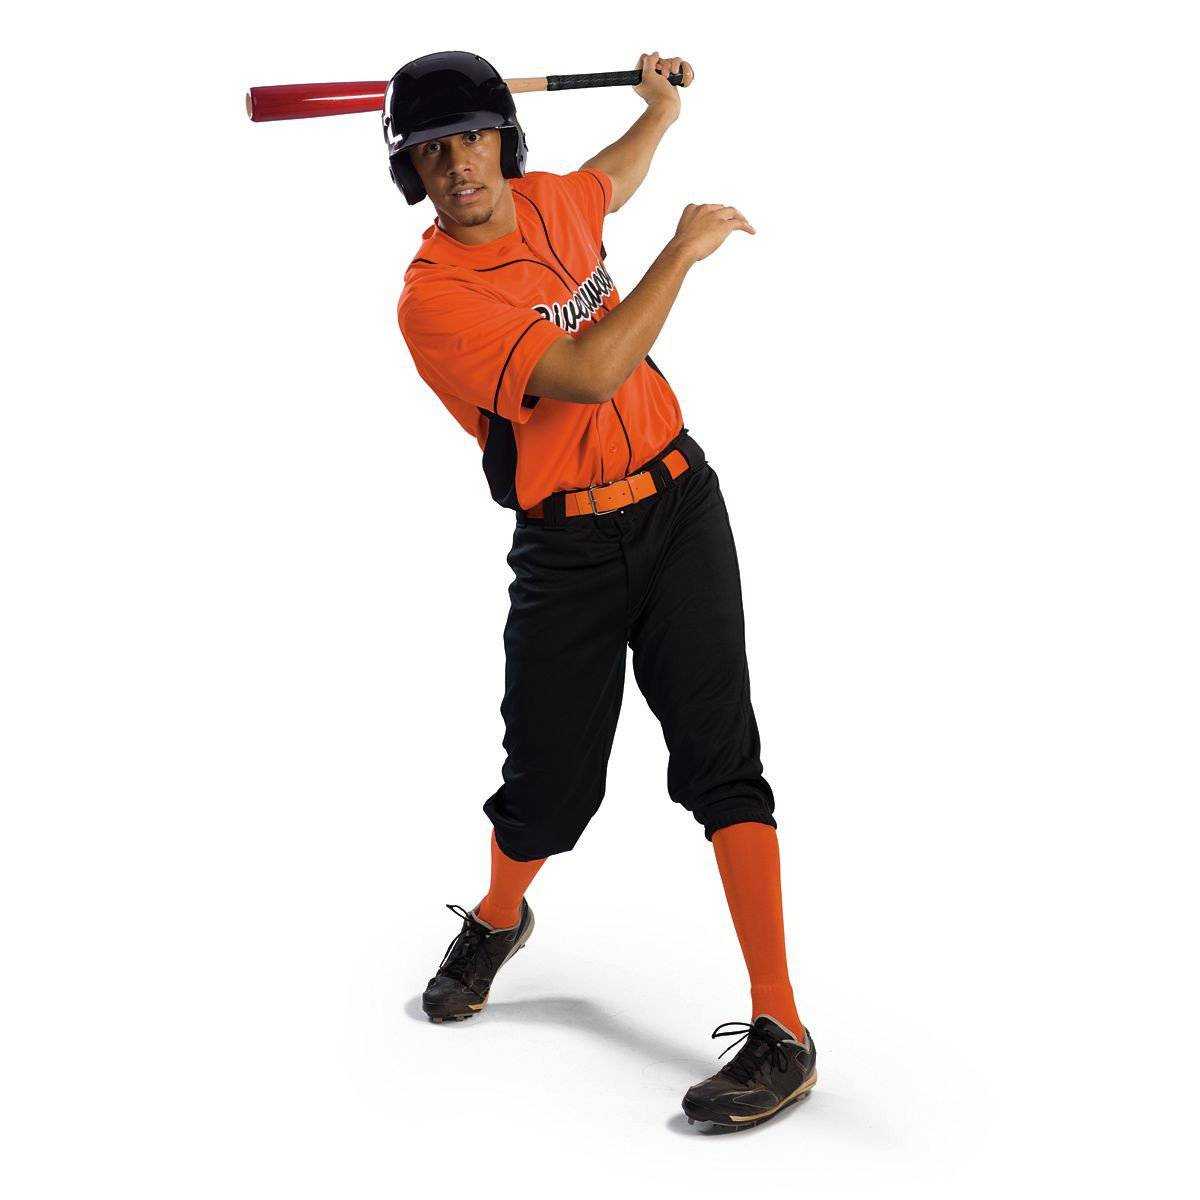 Augusta 1661 Slugger Jersey Youth - Navy Red - HIT a Double